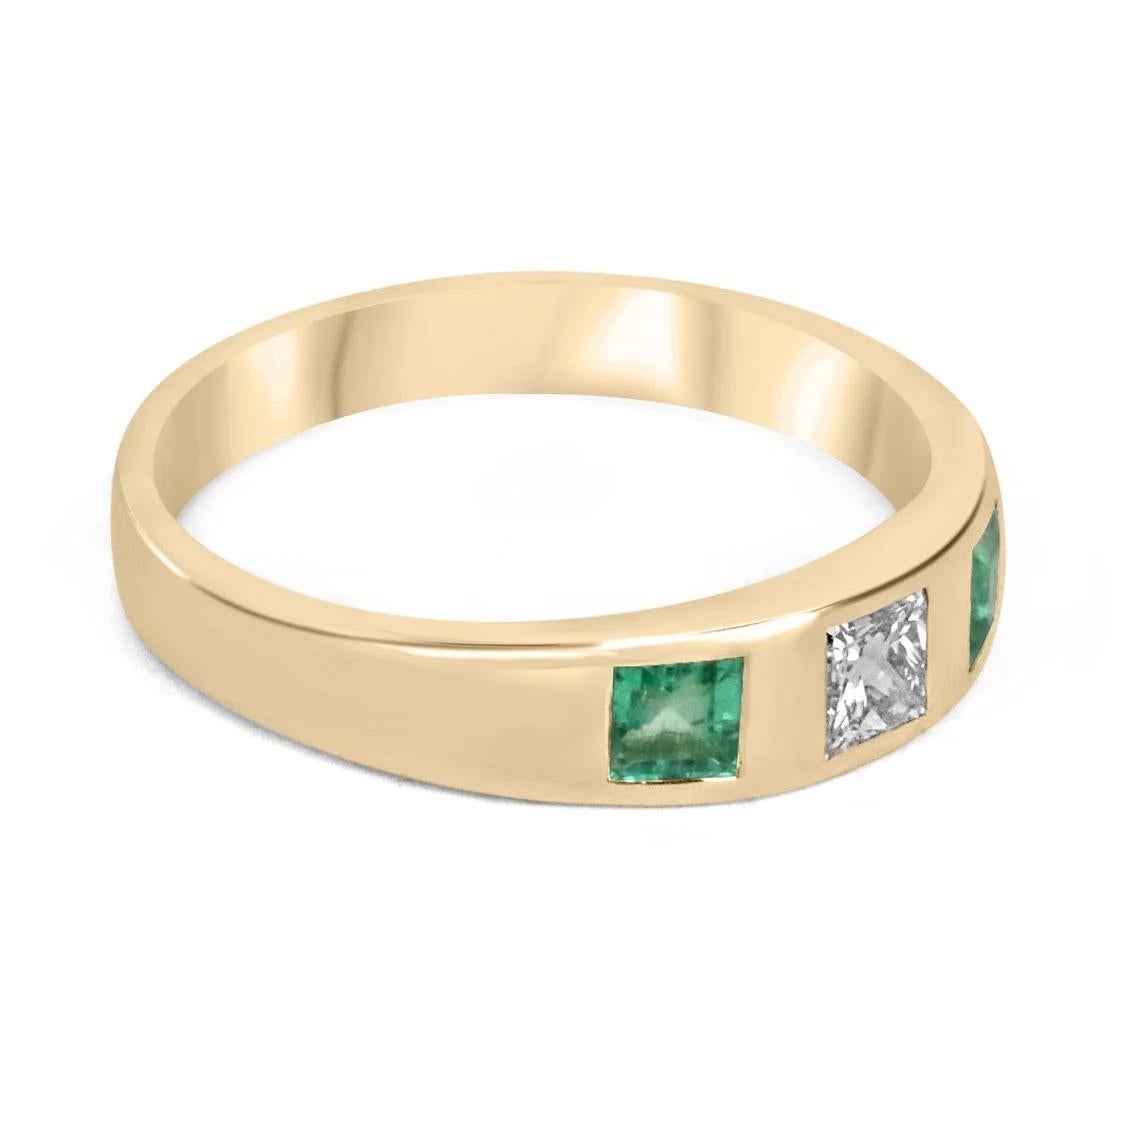 This band ring features a stunning 3.1mm princess-cut diamond as its centerpiece, with two beautiful asscher-cut emeralds accenting the sides, creating a striking three-stone look within the band. All three stones are securely bezel-set in 14k gold,